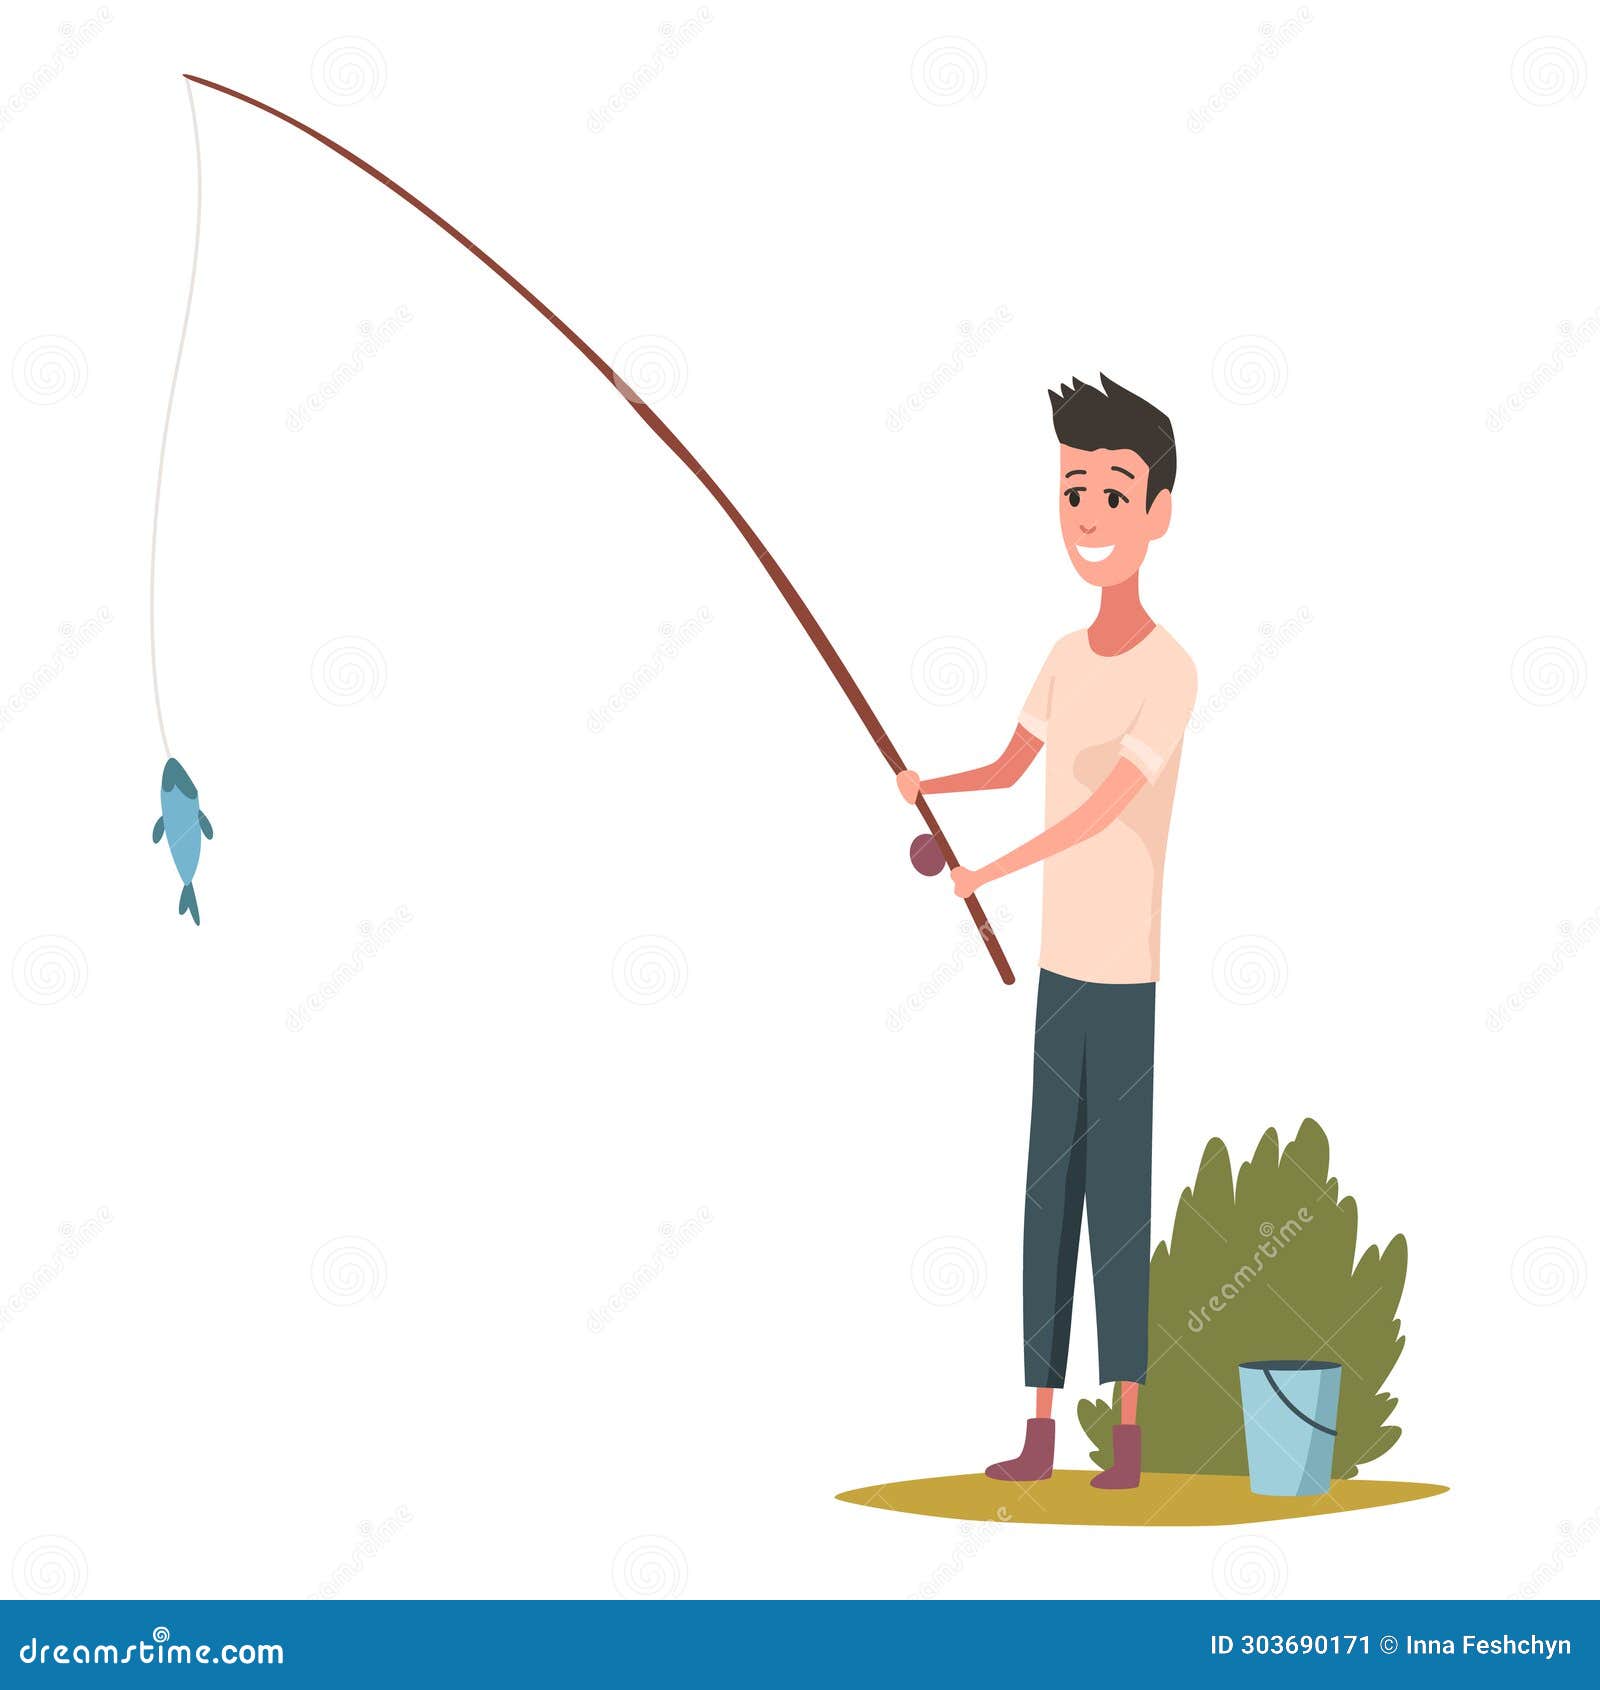 Children Fishing Icon. Happy Boy Child Holding Fish on Fishing Rod Hook.  Fisherman with Fish Catch Cartoon Stock Vector - Illustration of bucket,  young: 303690171